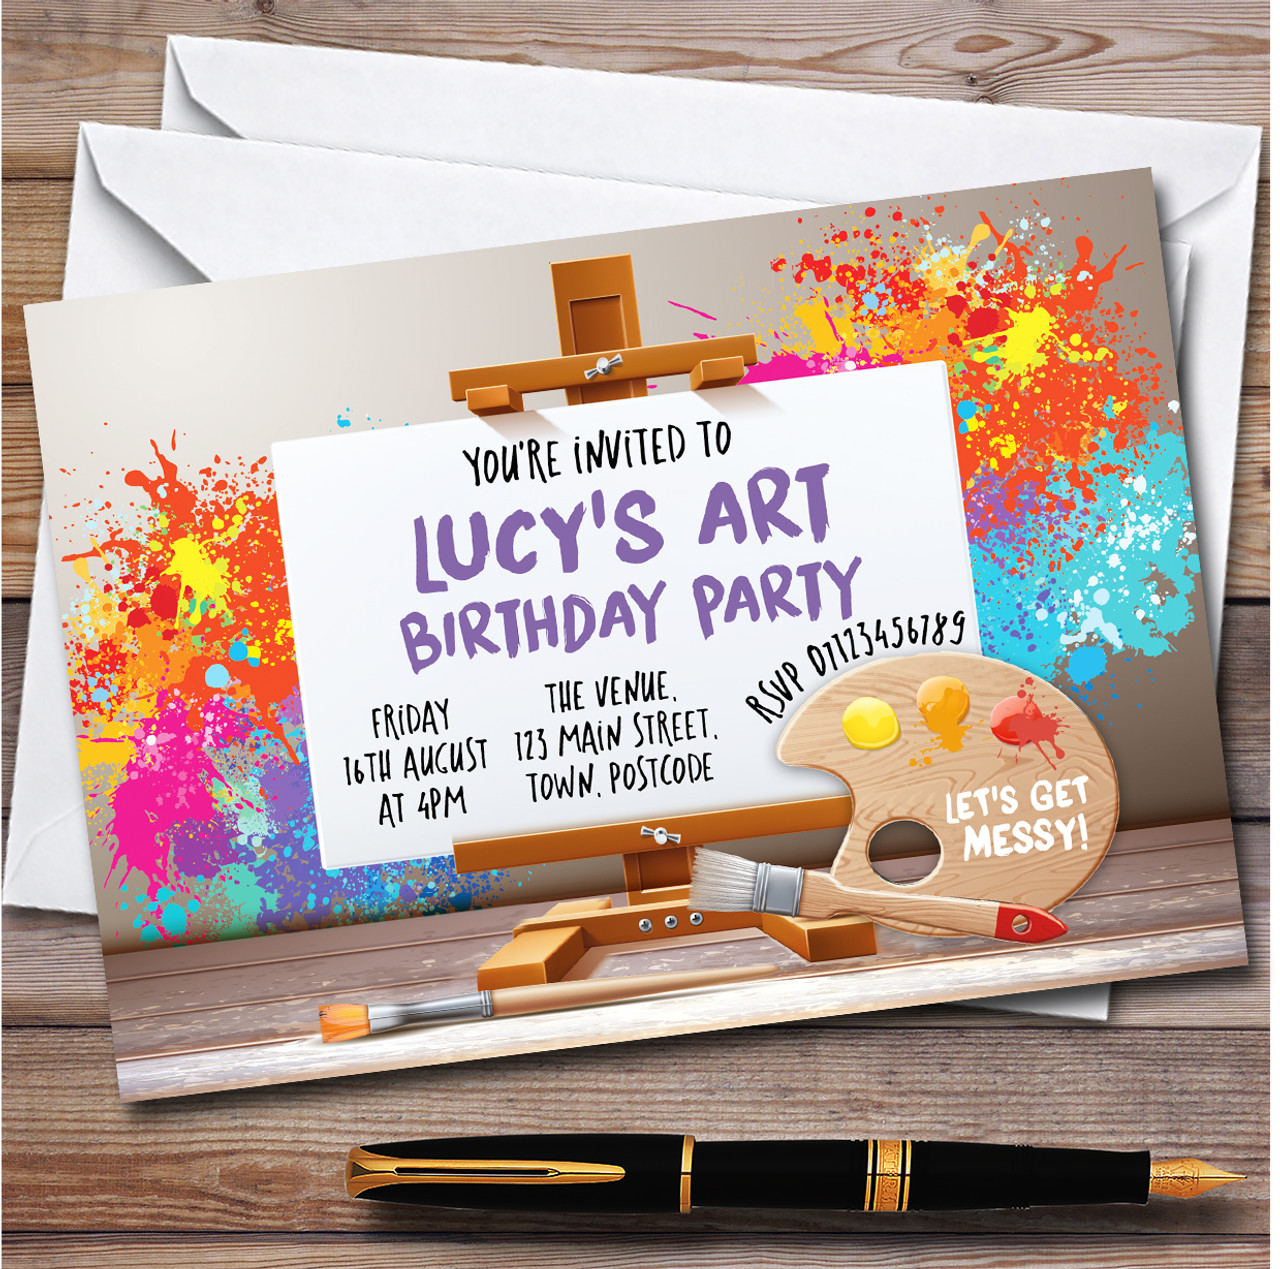 Arts and Crafts Birthday Party for Kids